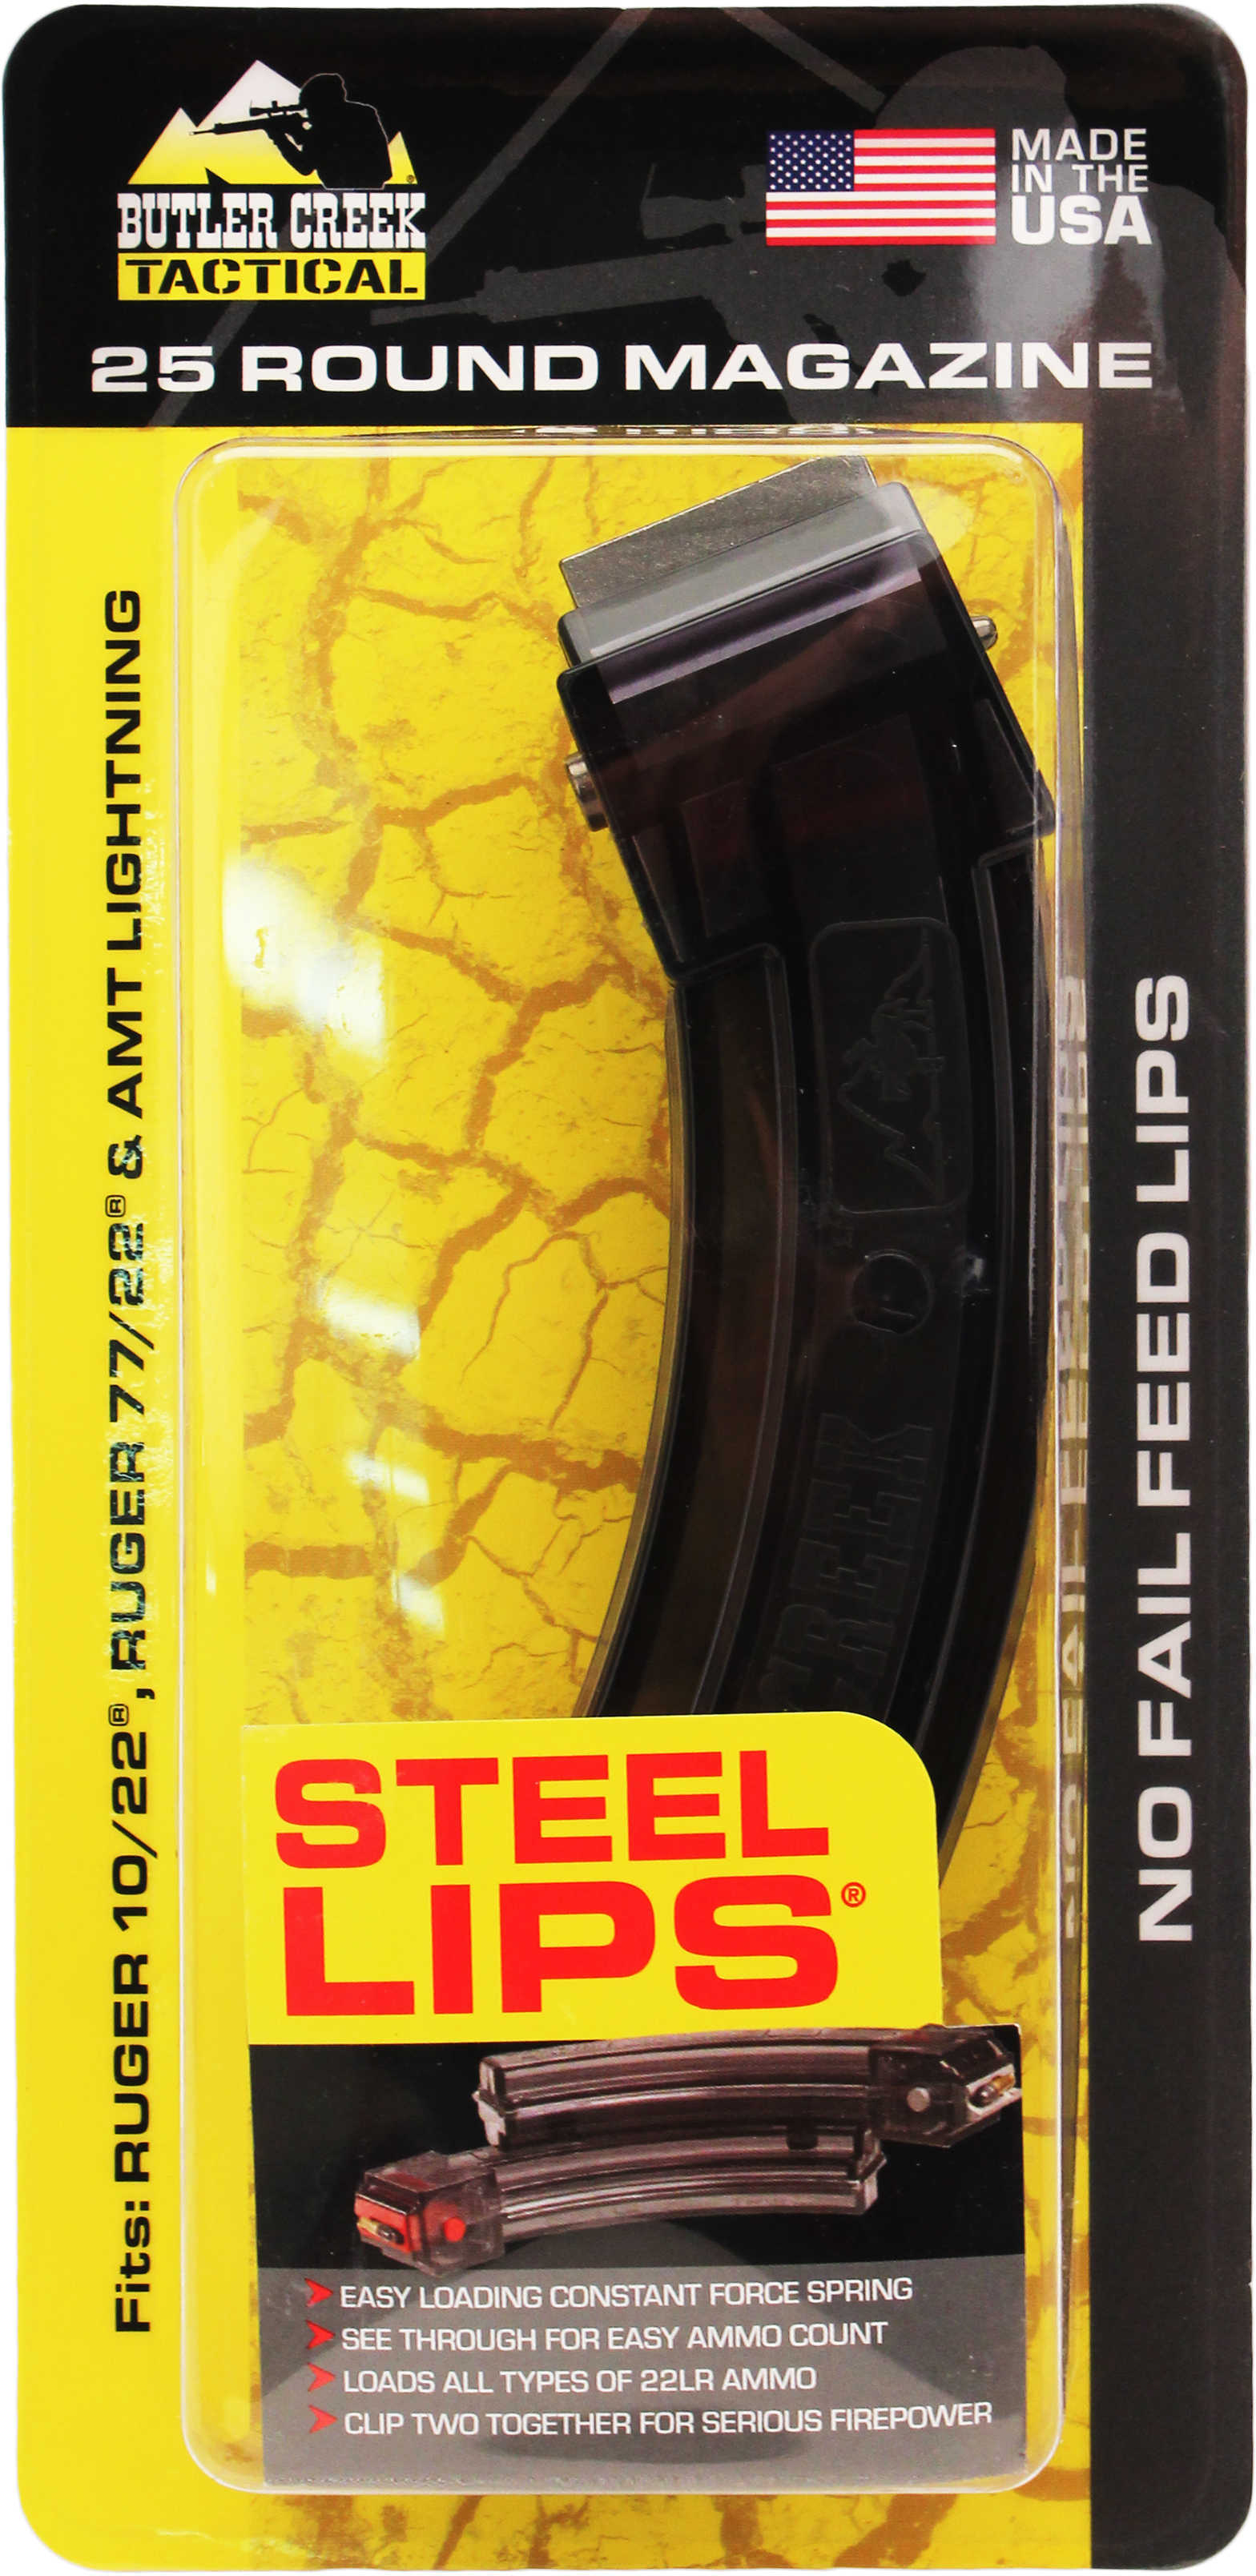 Butler Creek Steel Lips 10/22® 25-Round Magazine - Smoke For The Serious Or Competitive Shooter Who wants Ext